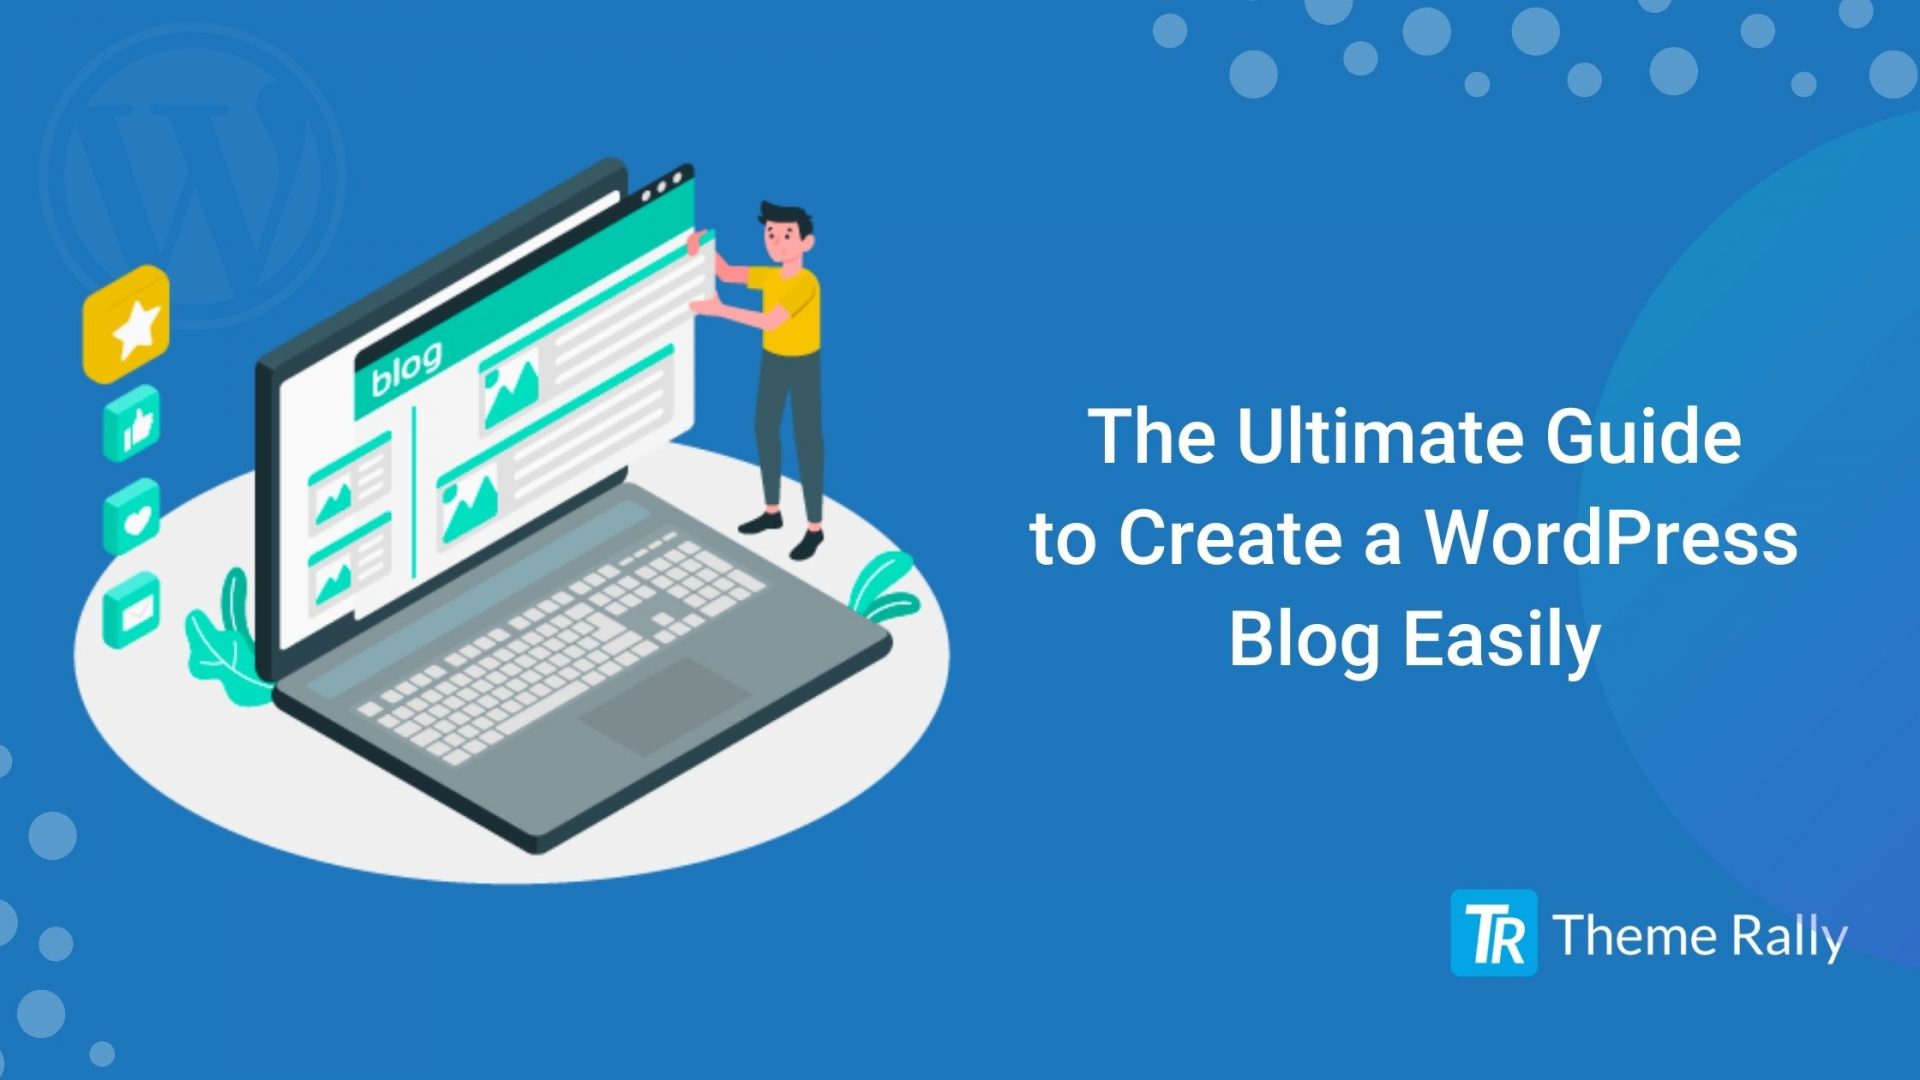 The Ultimate Guide to Create a WordPress Blog Easily